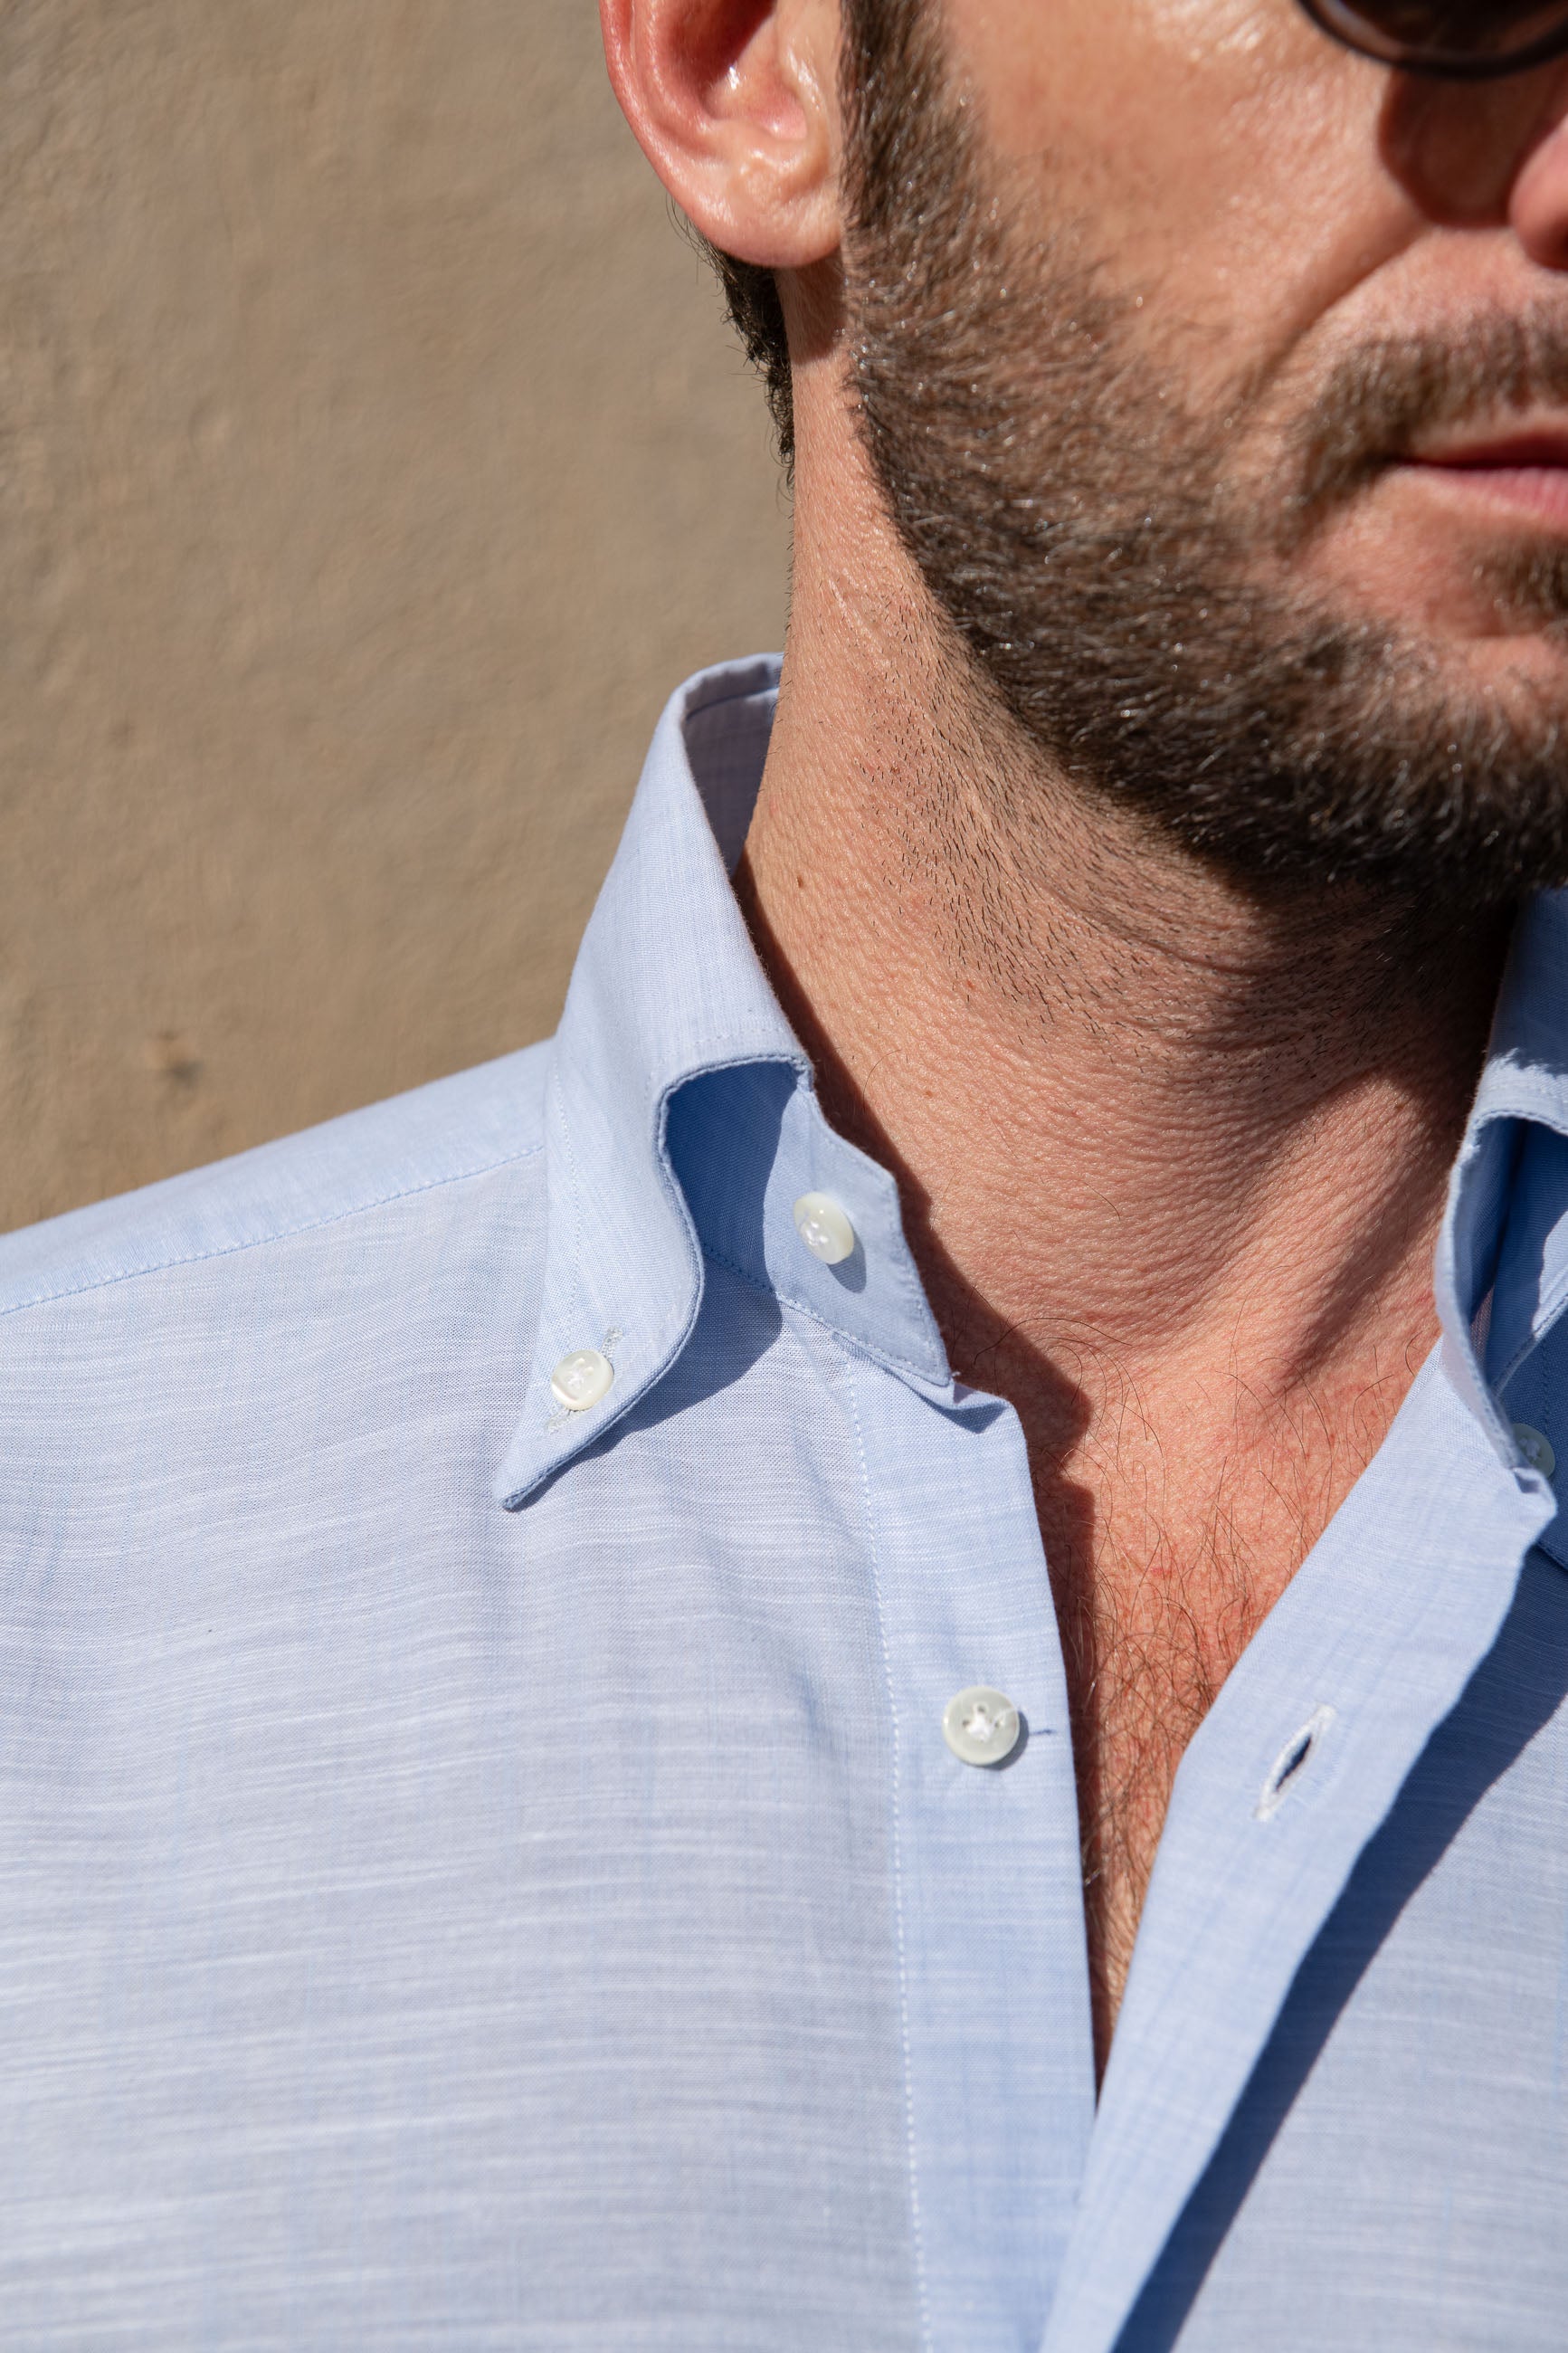 Light blue bamboo button-down shirt "Sartoriale collection" - Made In Italy